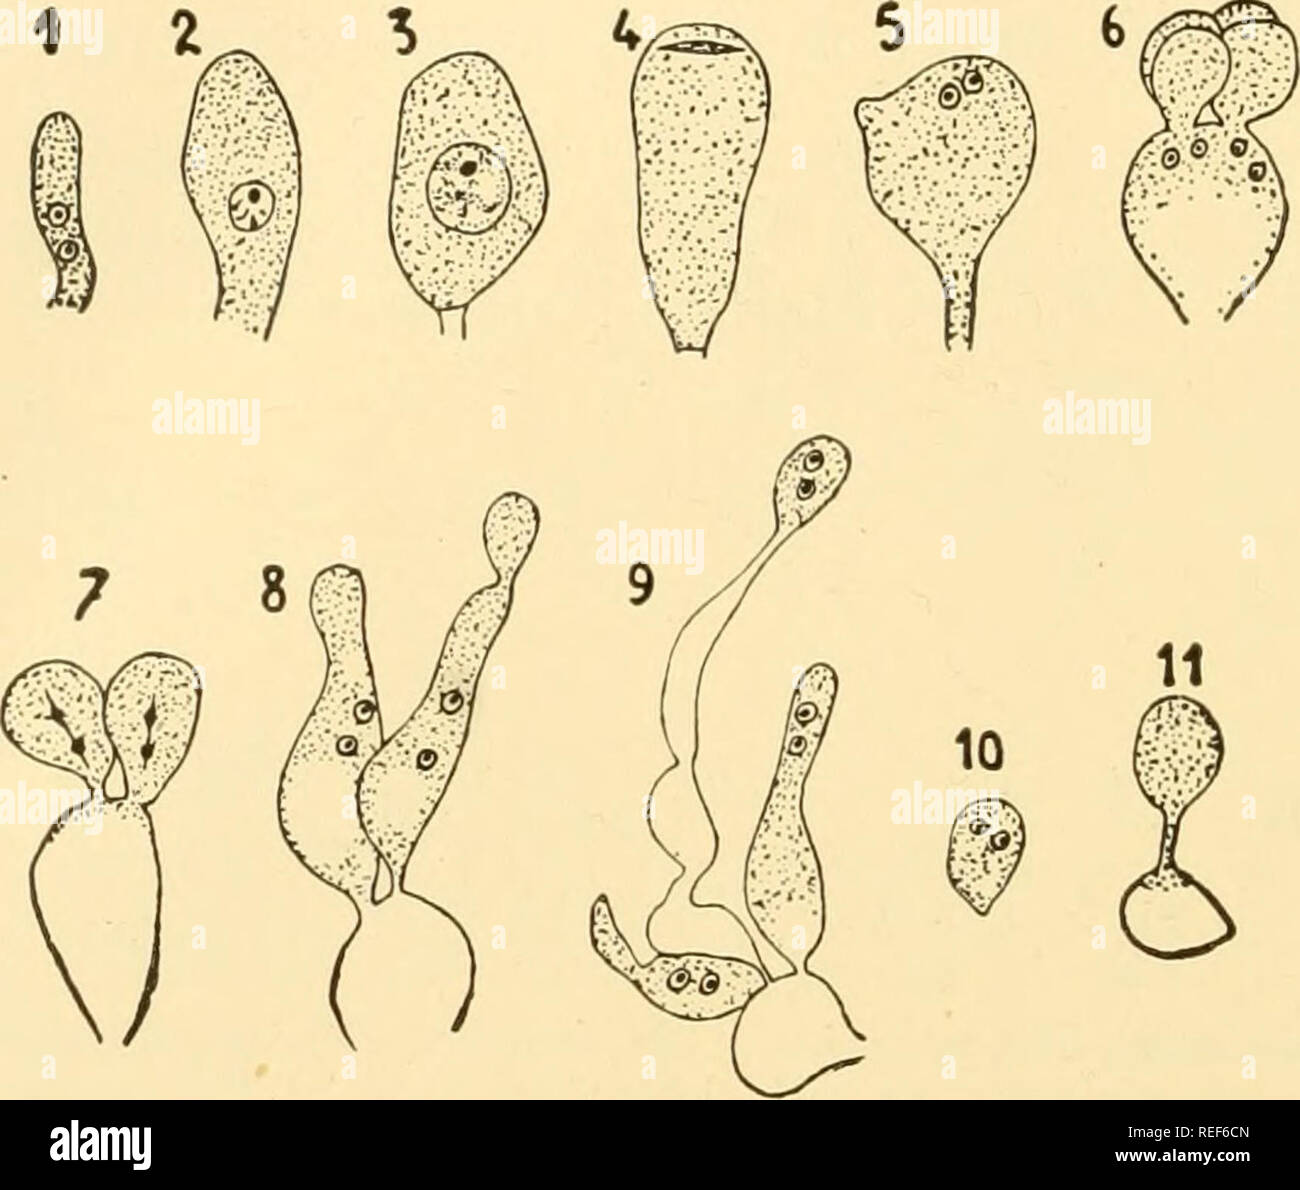 . Comparative morphology of Fungi. Fungi. 432 COMPARATIVE MORPHOLOGY OF FUNGI laterally, arise four, occasionally five or six, protuberances which become ellipsoidal, sessile spores (Fig 273, 1 and 2). In damp weather they germinate while on the basidium without being ab join ted, and each forms a short germ tube (Figs. 273, 3 and 4; 274, 8 and 9) which may branch and swell terminally to a conidium, slightly curved and pointed at the end. The conidia abjoint and germinate immediately, in T. helicospora by further sprouting. In T. deliquescens, the basidiospore, the germ tube and conidia are un Stock Photo